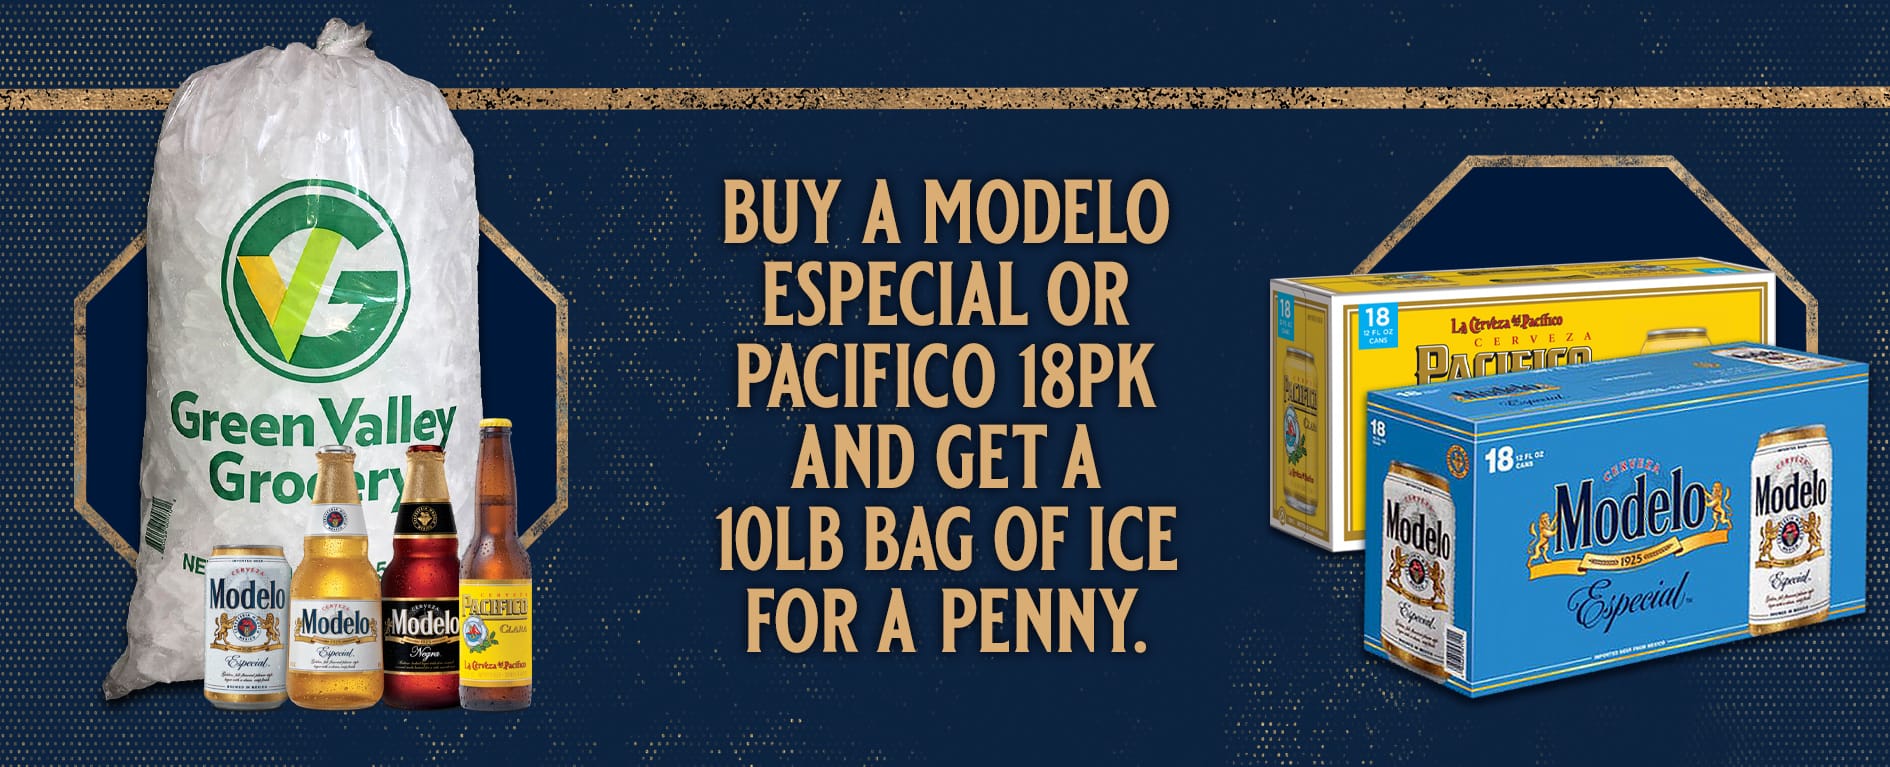 Buy a Model Especial or Pacifico 18 pack and get a 10 pound bag of ice for a penny.